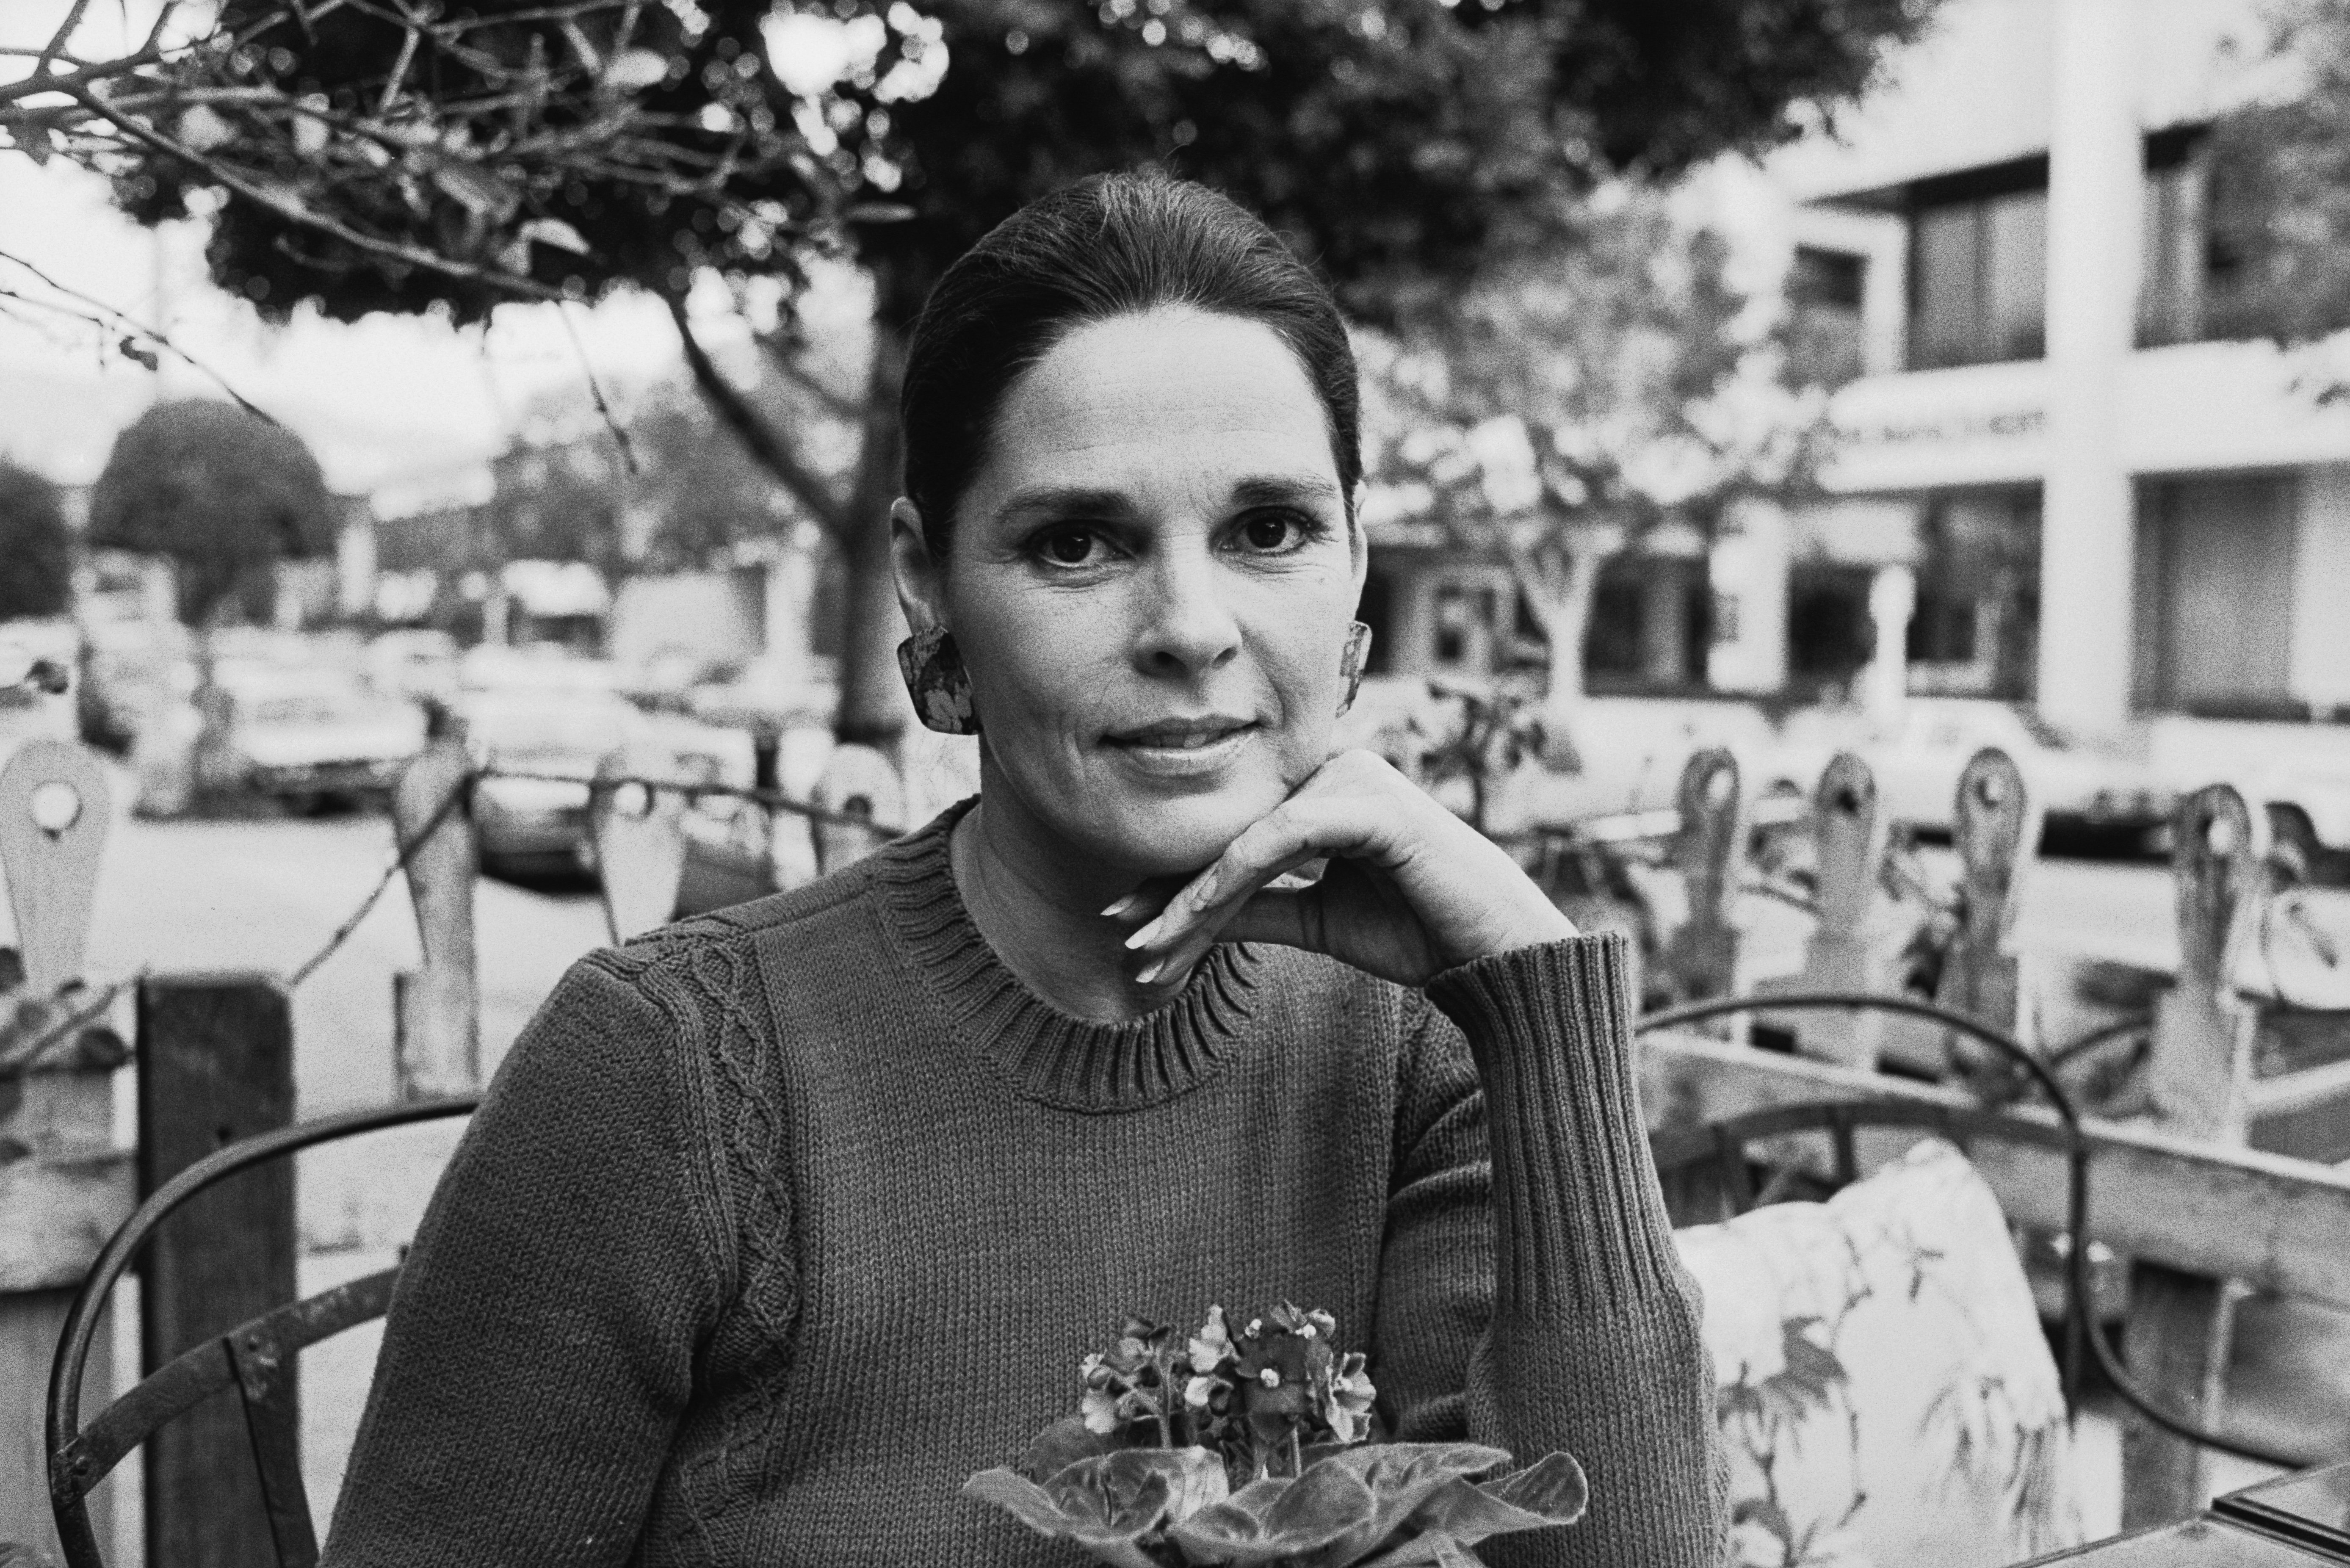 Ali MacGraw pictured wearing a knitted jumper while out at a restaurant February 6, 1985. / Source: Getty Images